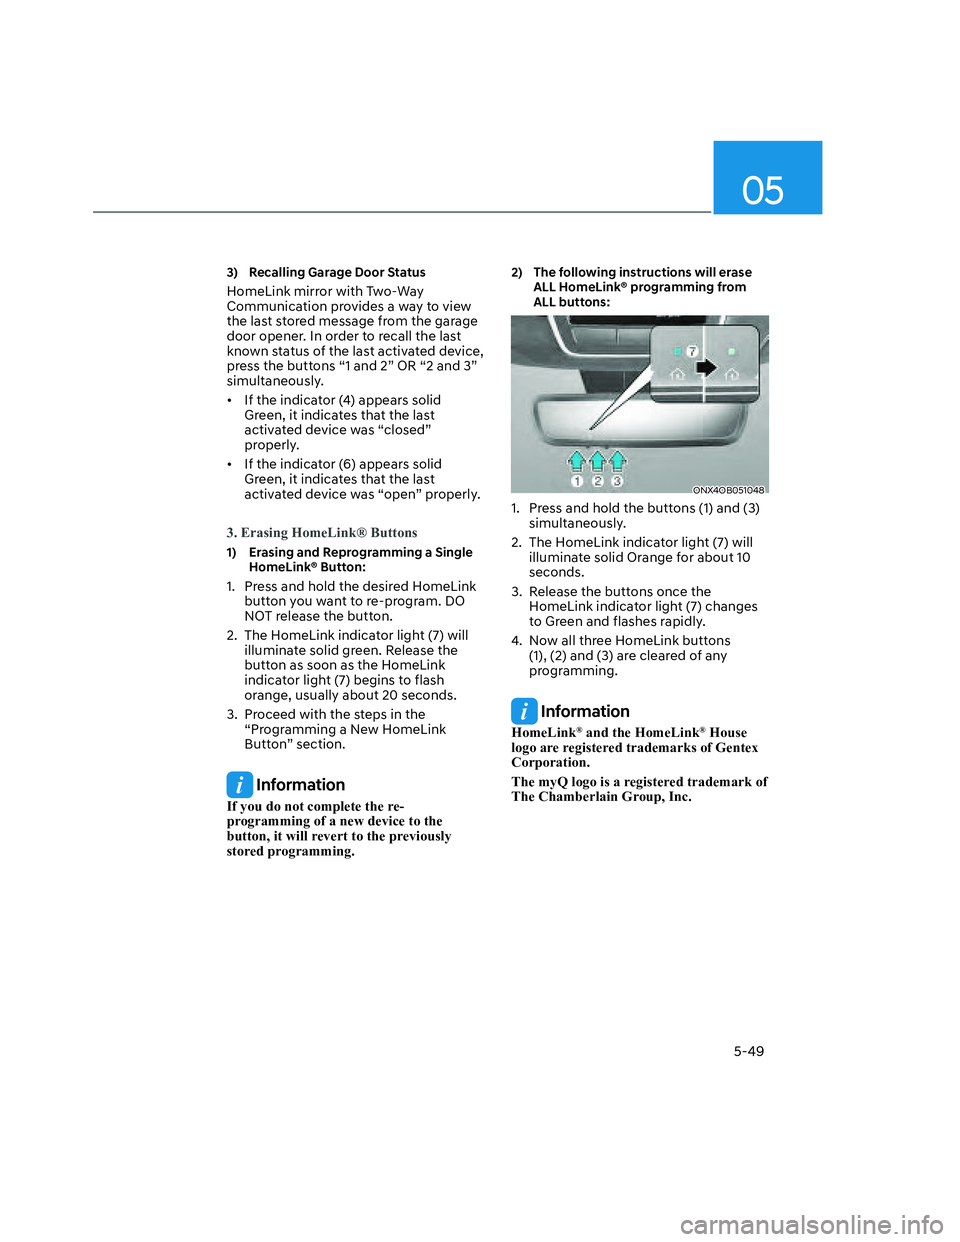 HYUNDAI SANTA CRUZ 2022  Owners Manual 05
5-49
3)  Recalling Garage Door Status
HomeLink mirror with Two-Way 
Communication provides a way to view 
the last stored message from the garage 
door opener. In order to recall the last 
known st